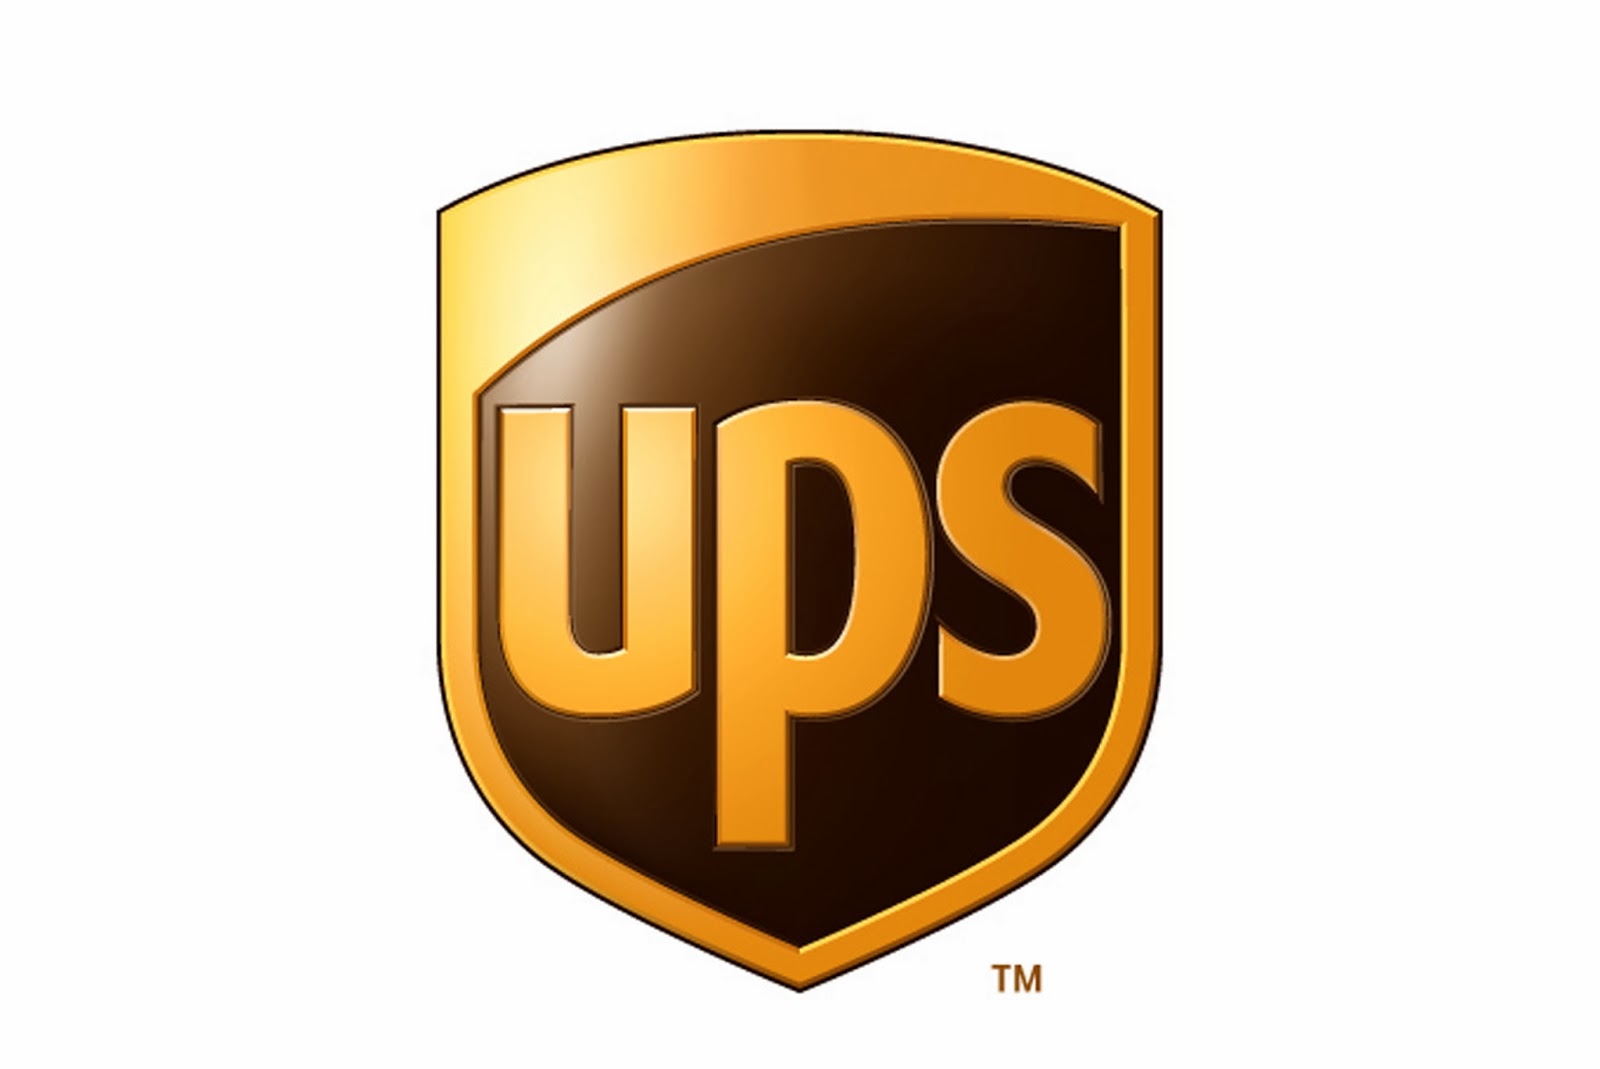 UPS Savings Program is now available to NAHB Members